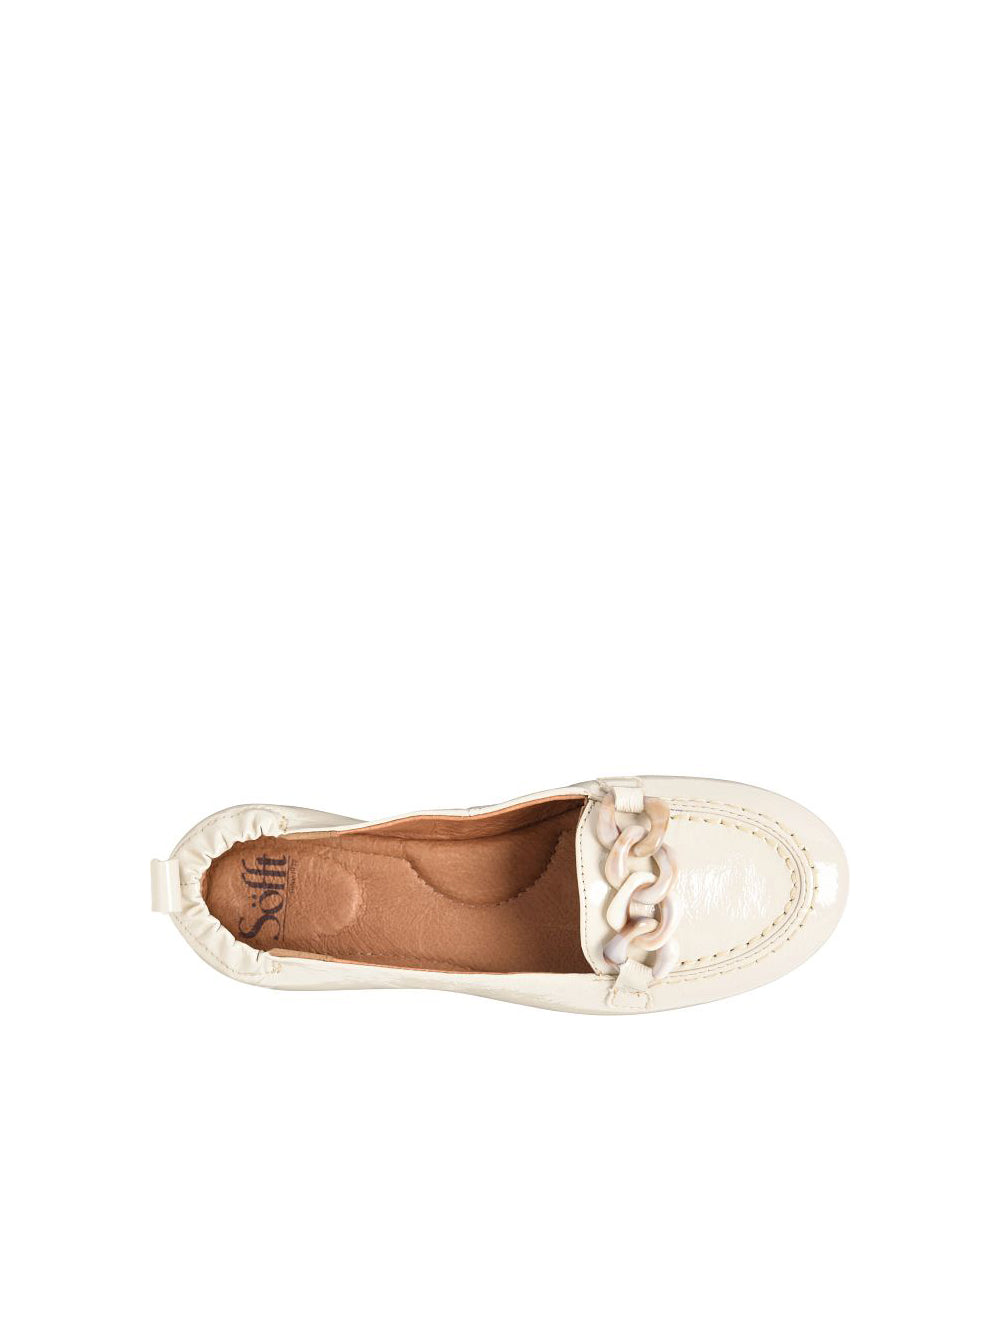 sofft shoes kadyn chain link ballet flat in tapioca white